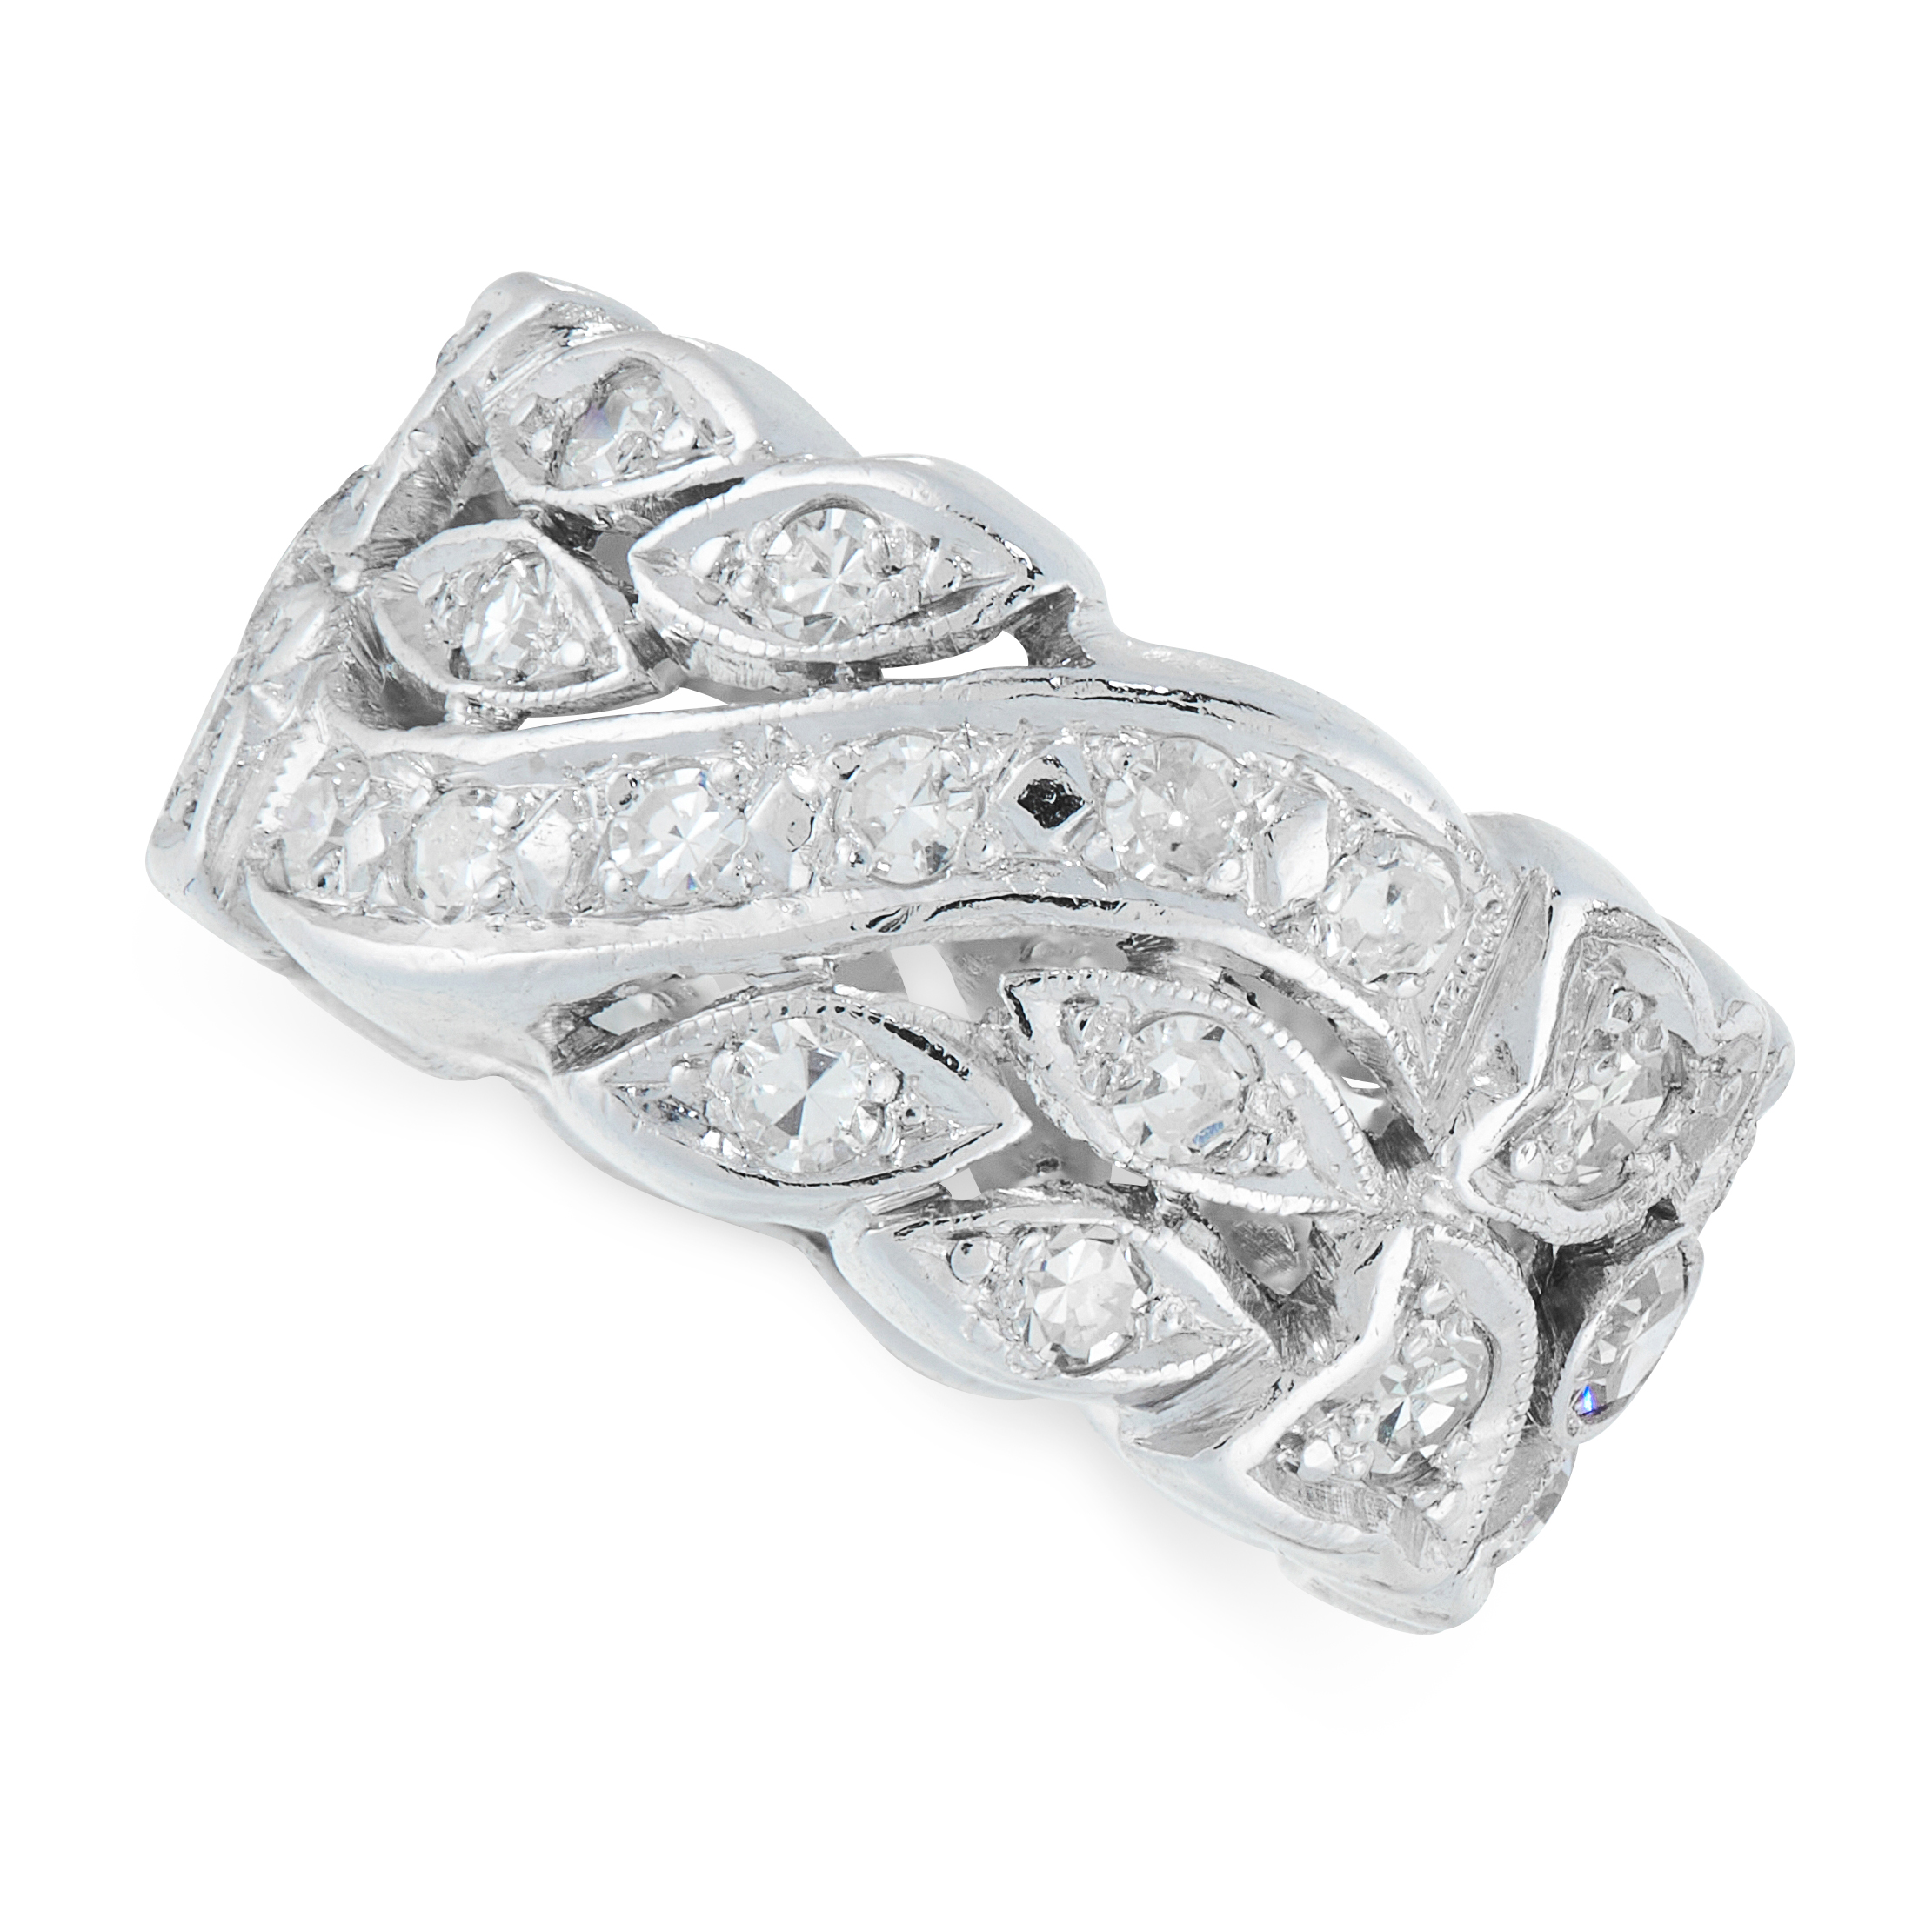 A DIAMOND BAND RING in open framework, set with round cut diamonds, unmarked, size K / 5.25, 6.90g.